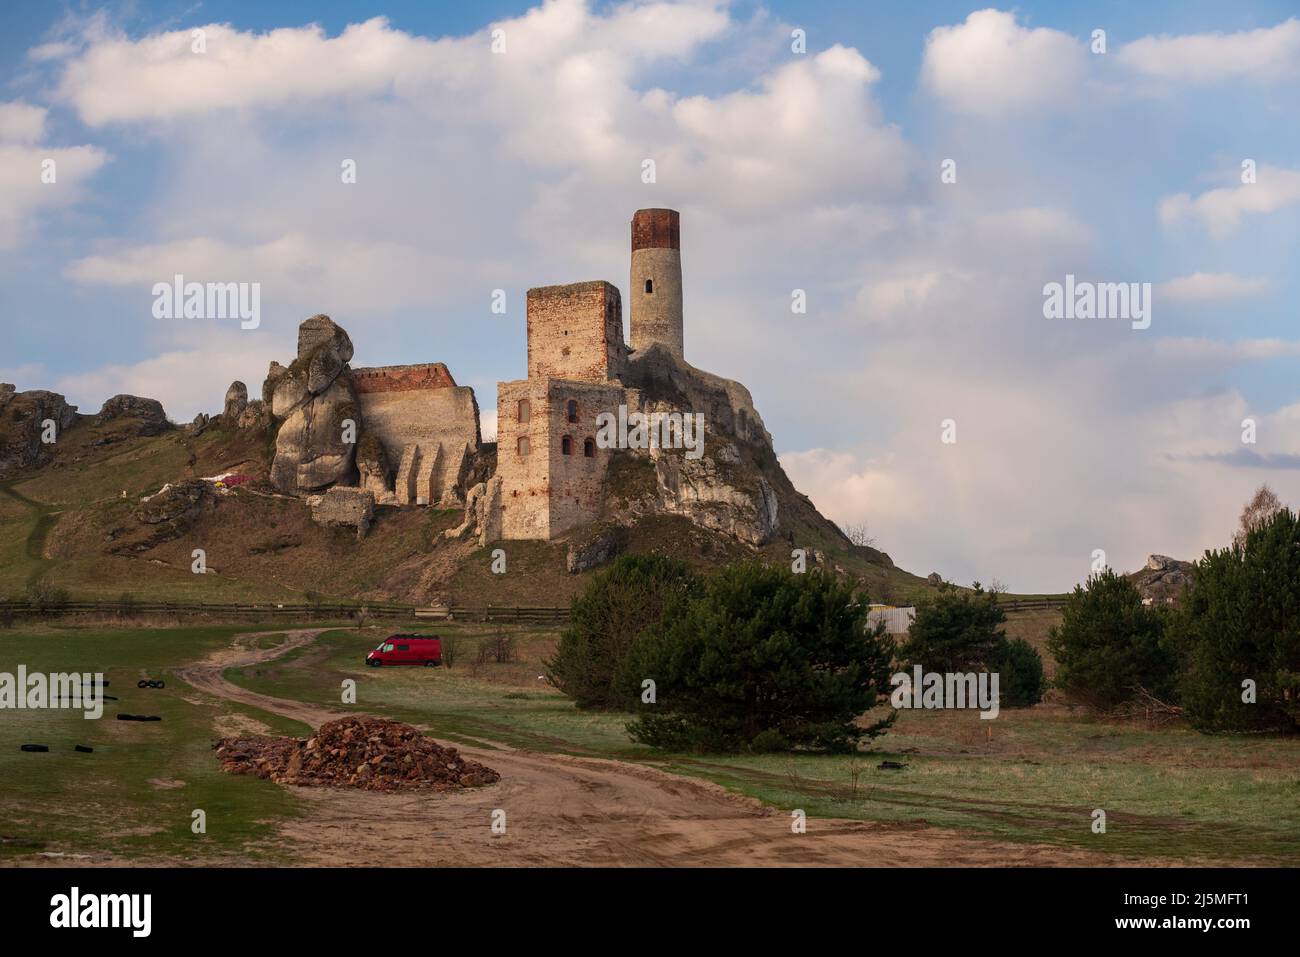 Aerial view of castle ruins in Olsztyn in Poland Stock Photo